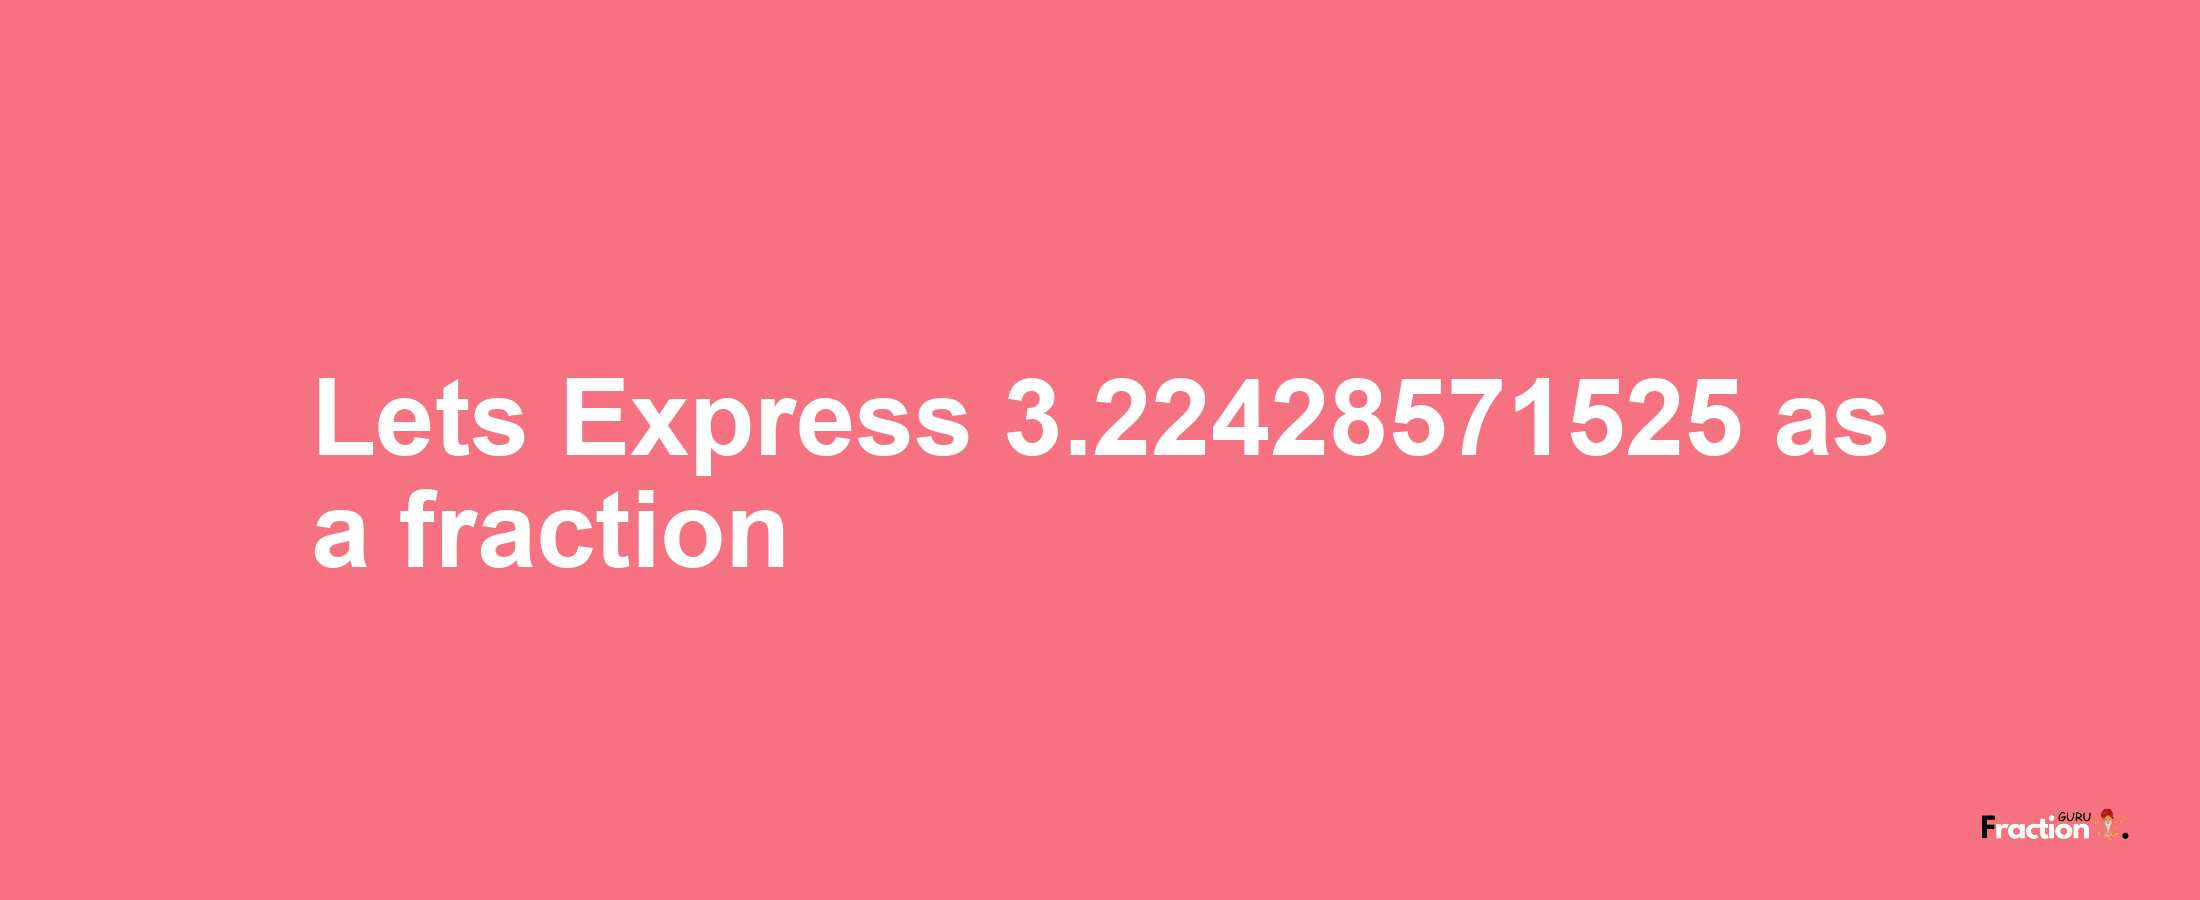 Lets Express 3.22428571525 as afraction